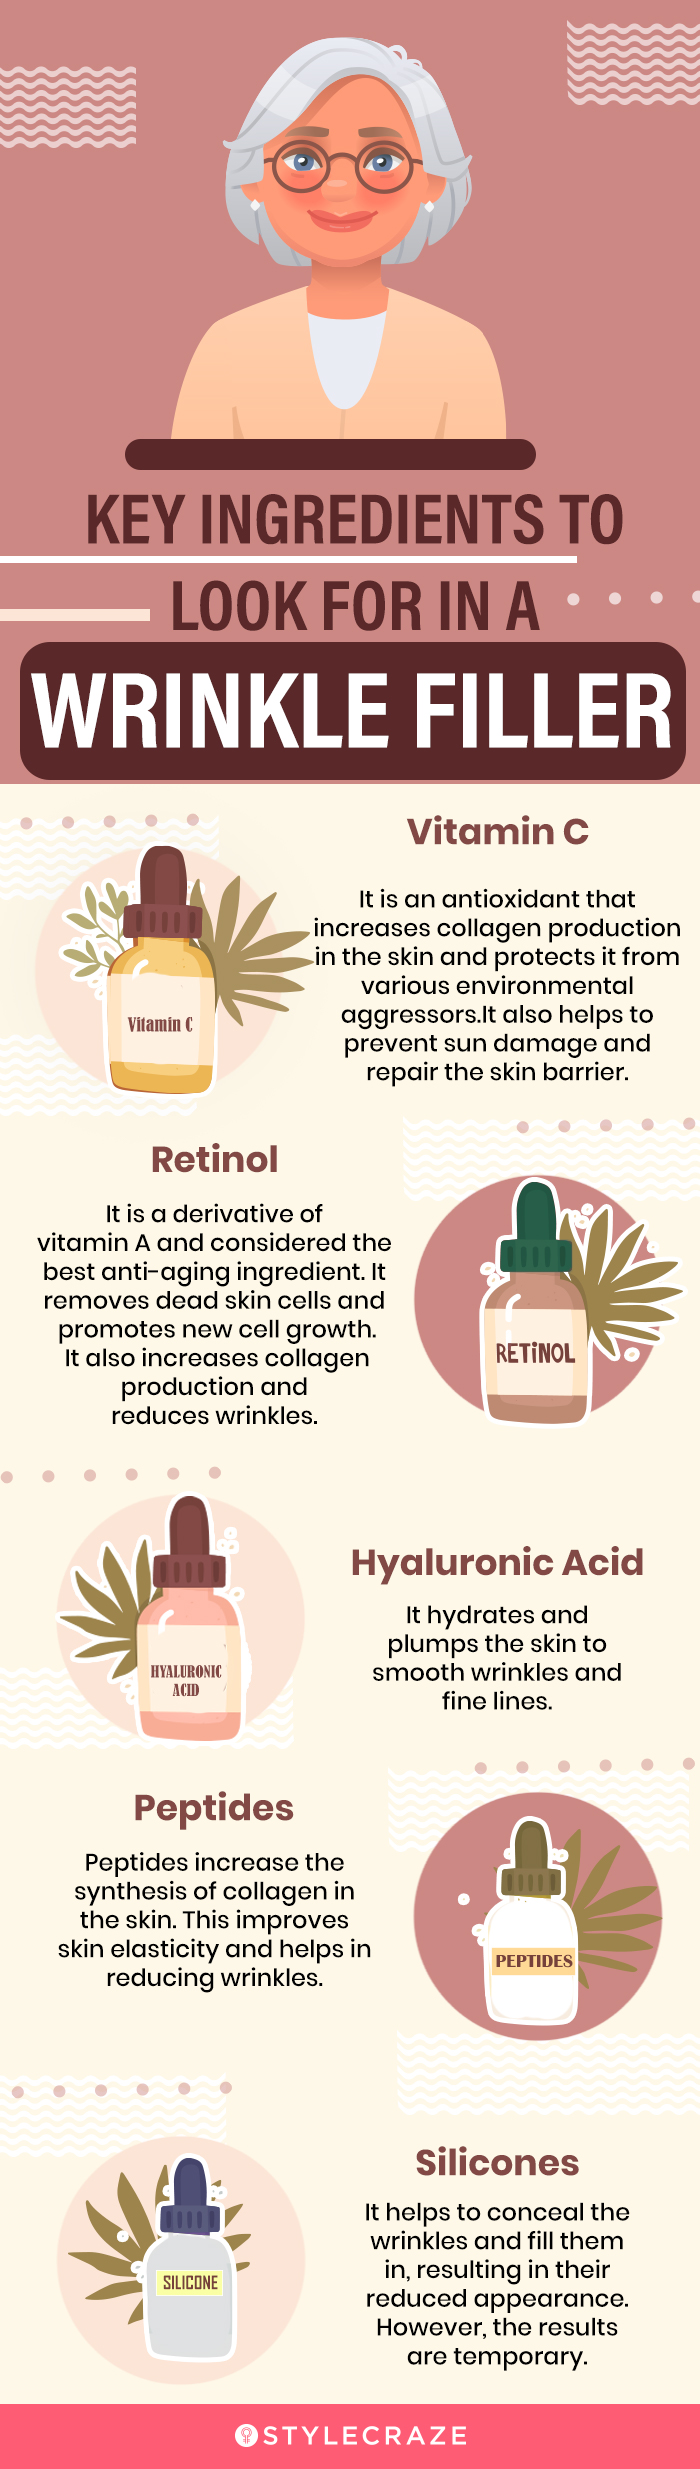 Key Ingredients To Look For In A Wrinkle Filler (infographic)